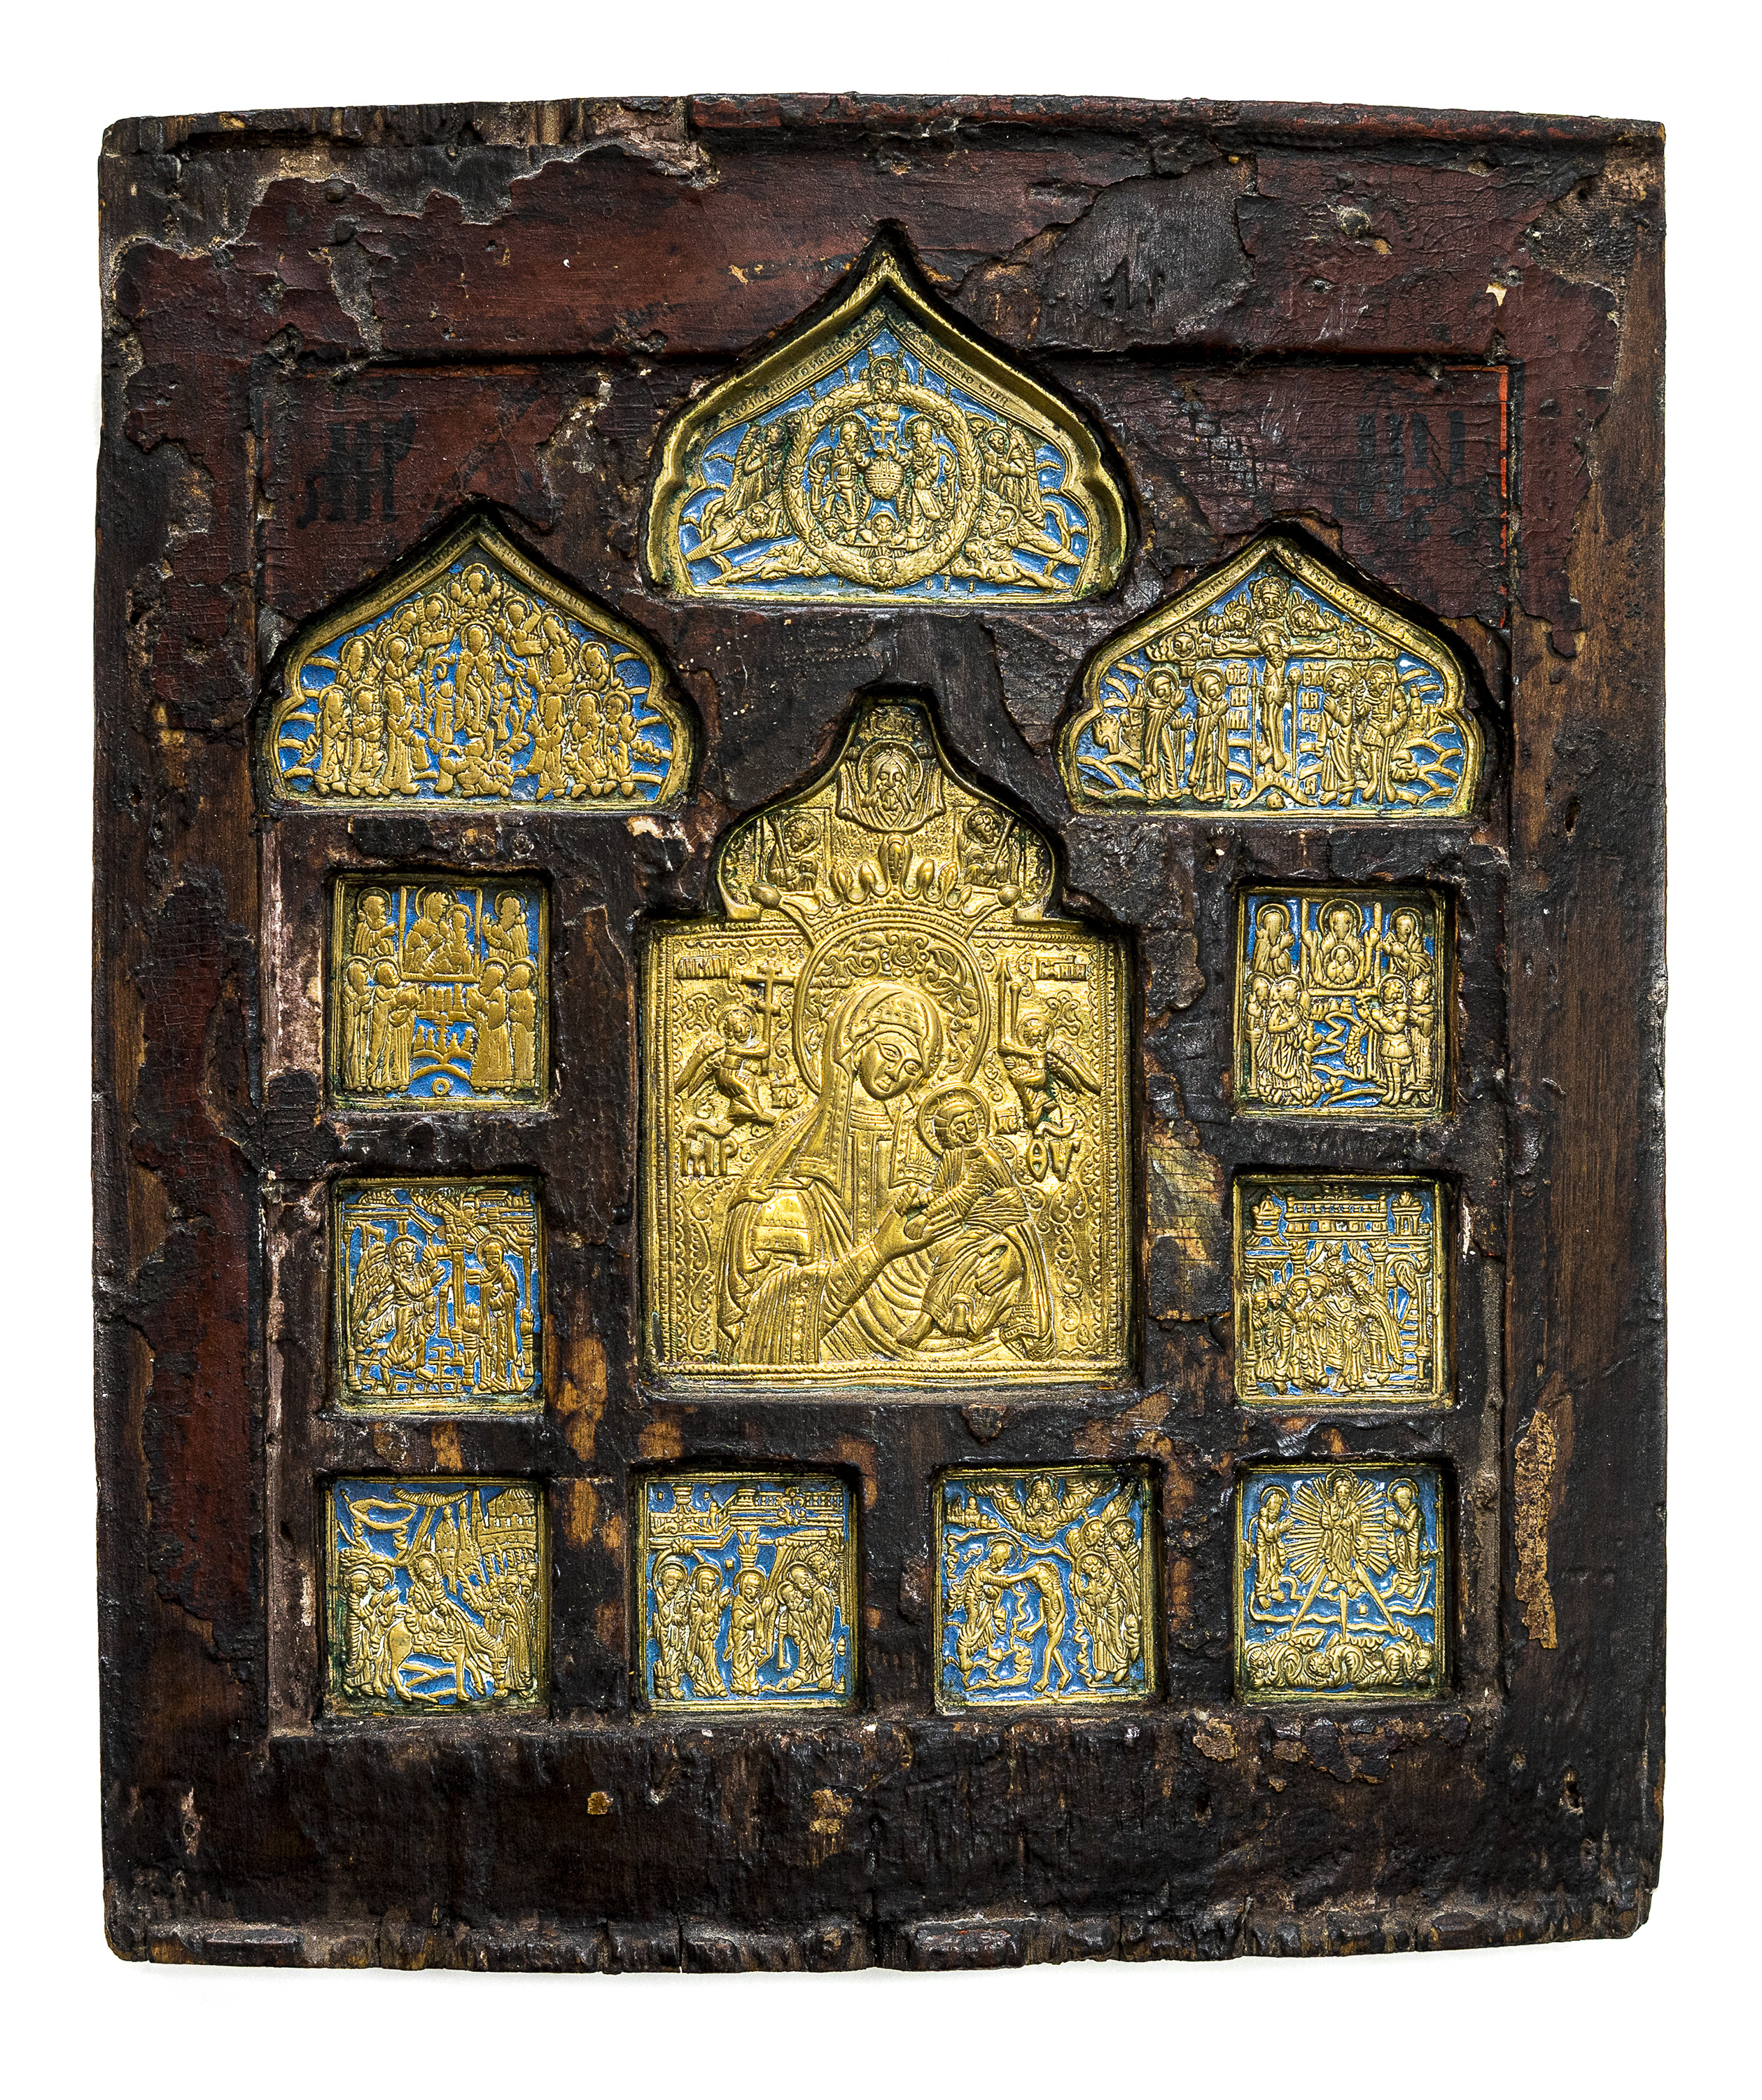 <p><i>Mother of God of the Passion</i>, Russia, 19th century,&nbsp;cast copper, brass and champlev&eacute; enamel inset into an earlier (pre-18th century) icon panel, private collection, Melbourne</p>